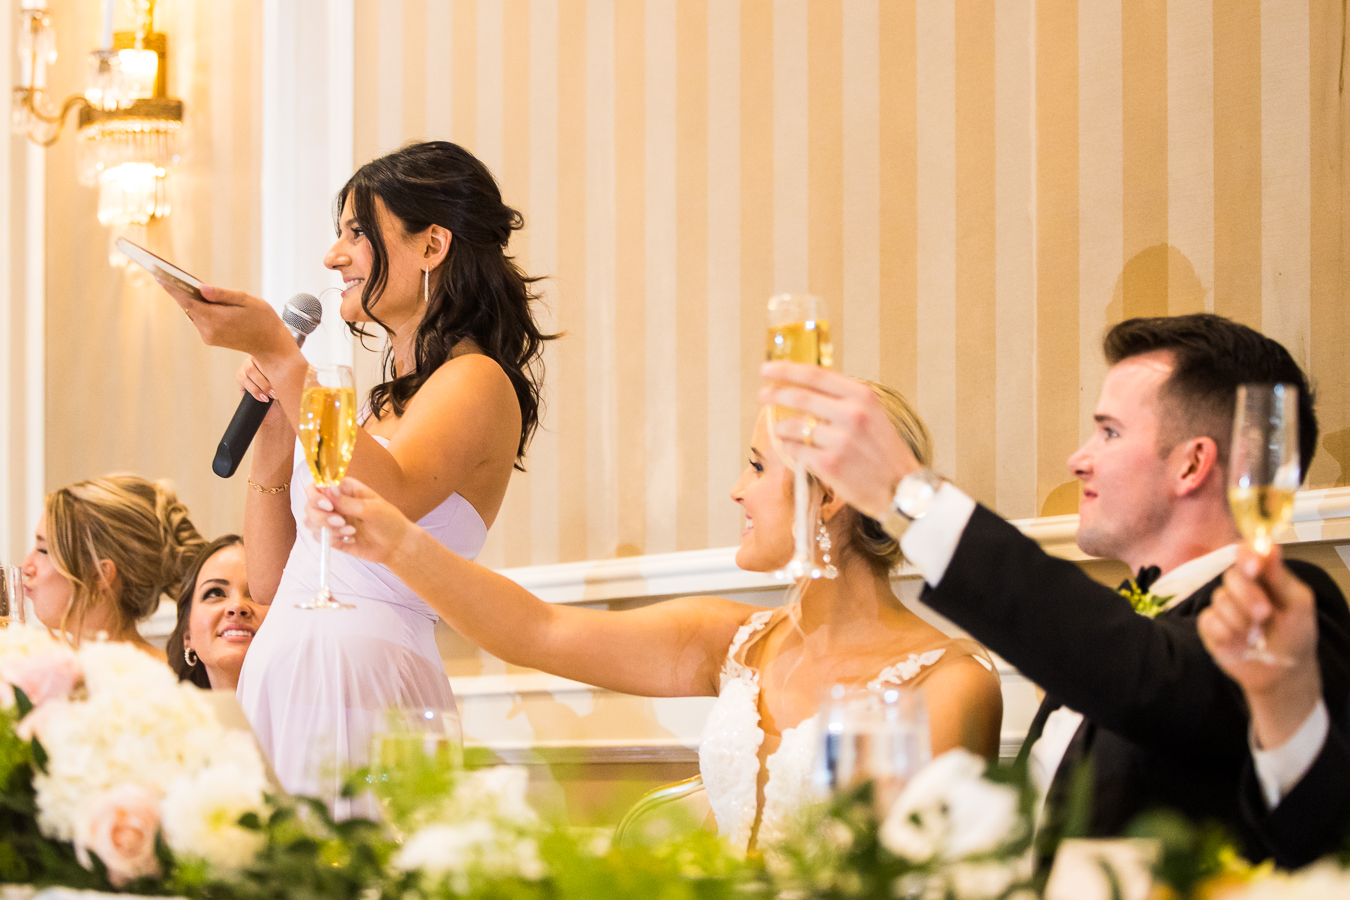 image of the bride and groom and a bridesmaid toasting at the wedding reception